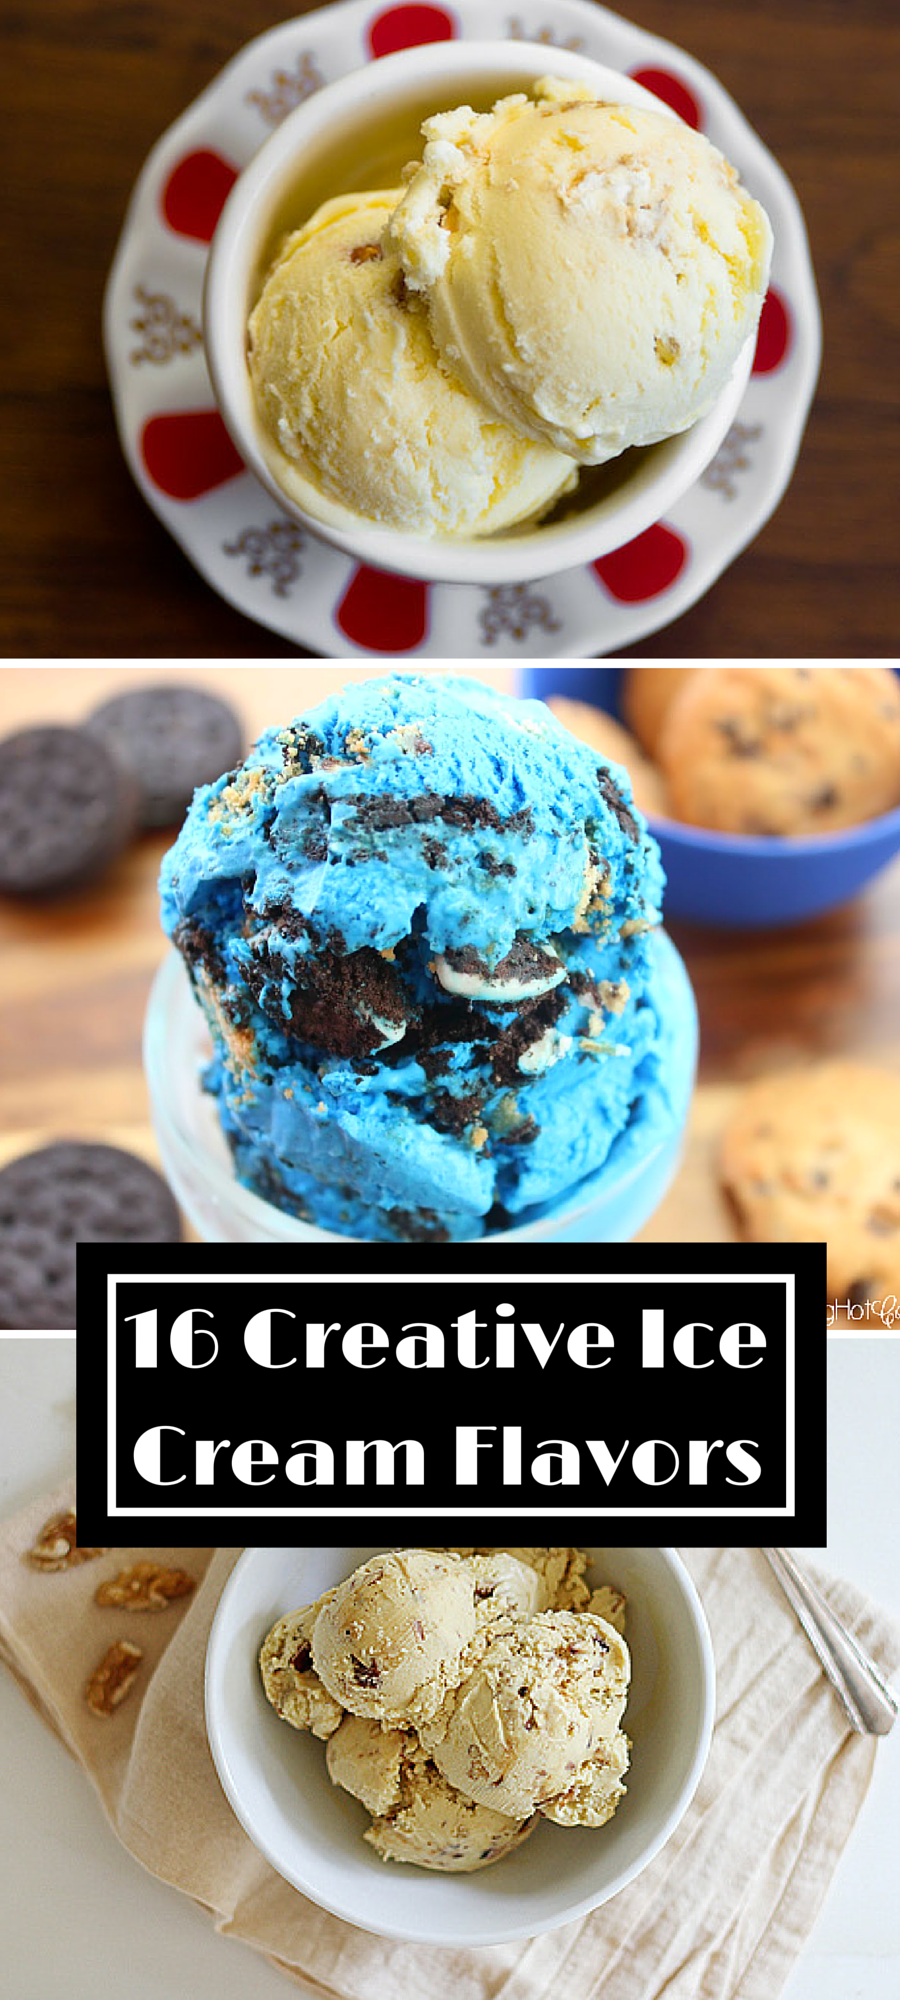 16 Creative Ice Cream Flavors To Try Right Now - TGIF ...
 Ice Cream Flavors Pictures